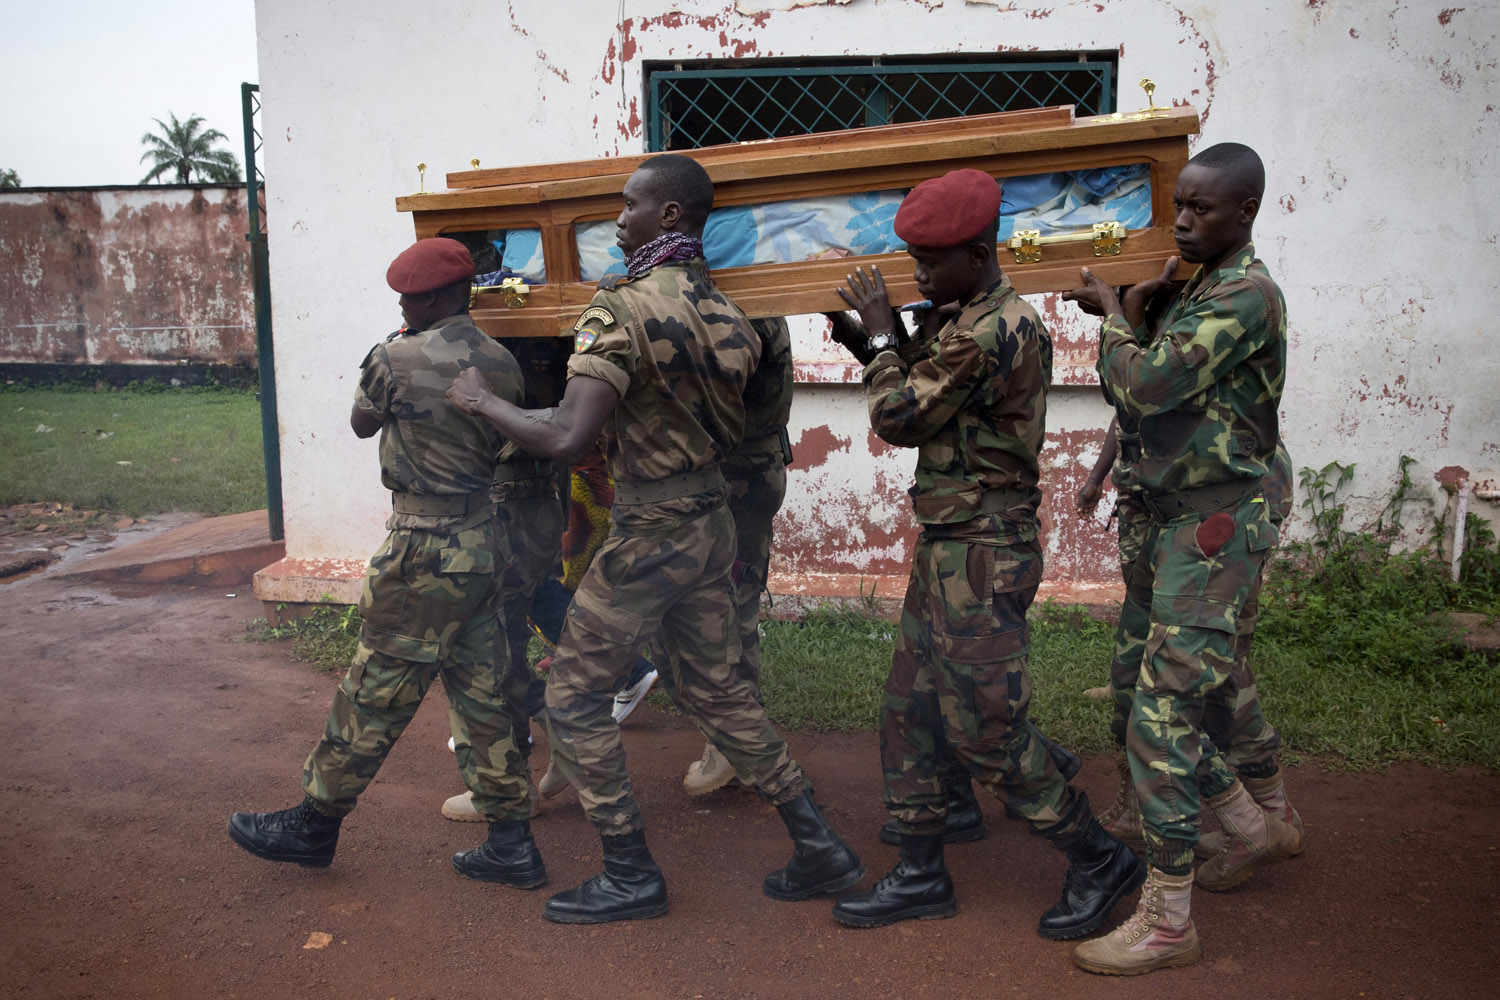 CAR army soldiers carry the body of a colleague assassinated by members of the Seleka . The man, Tanguy Residou, was a nephew of the president Bozizé. Murders and others exactions made by the Seleka are increasing in the country. Bangui.